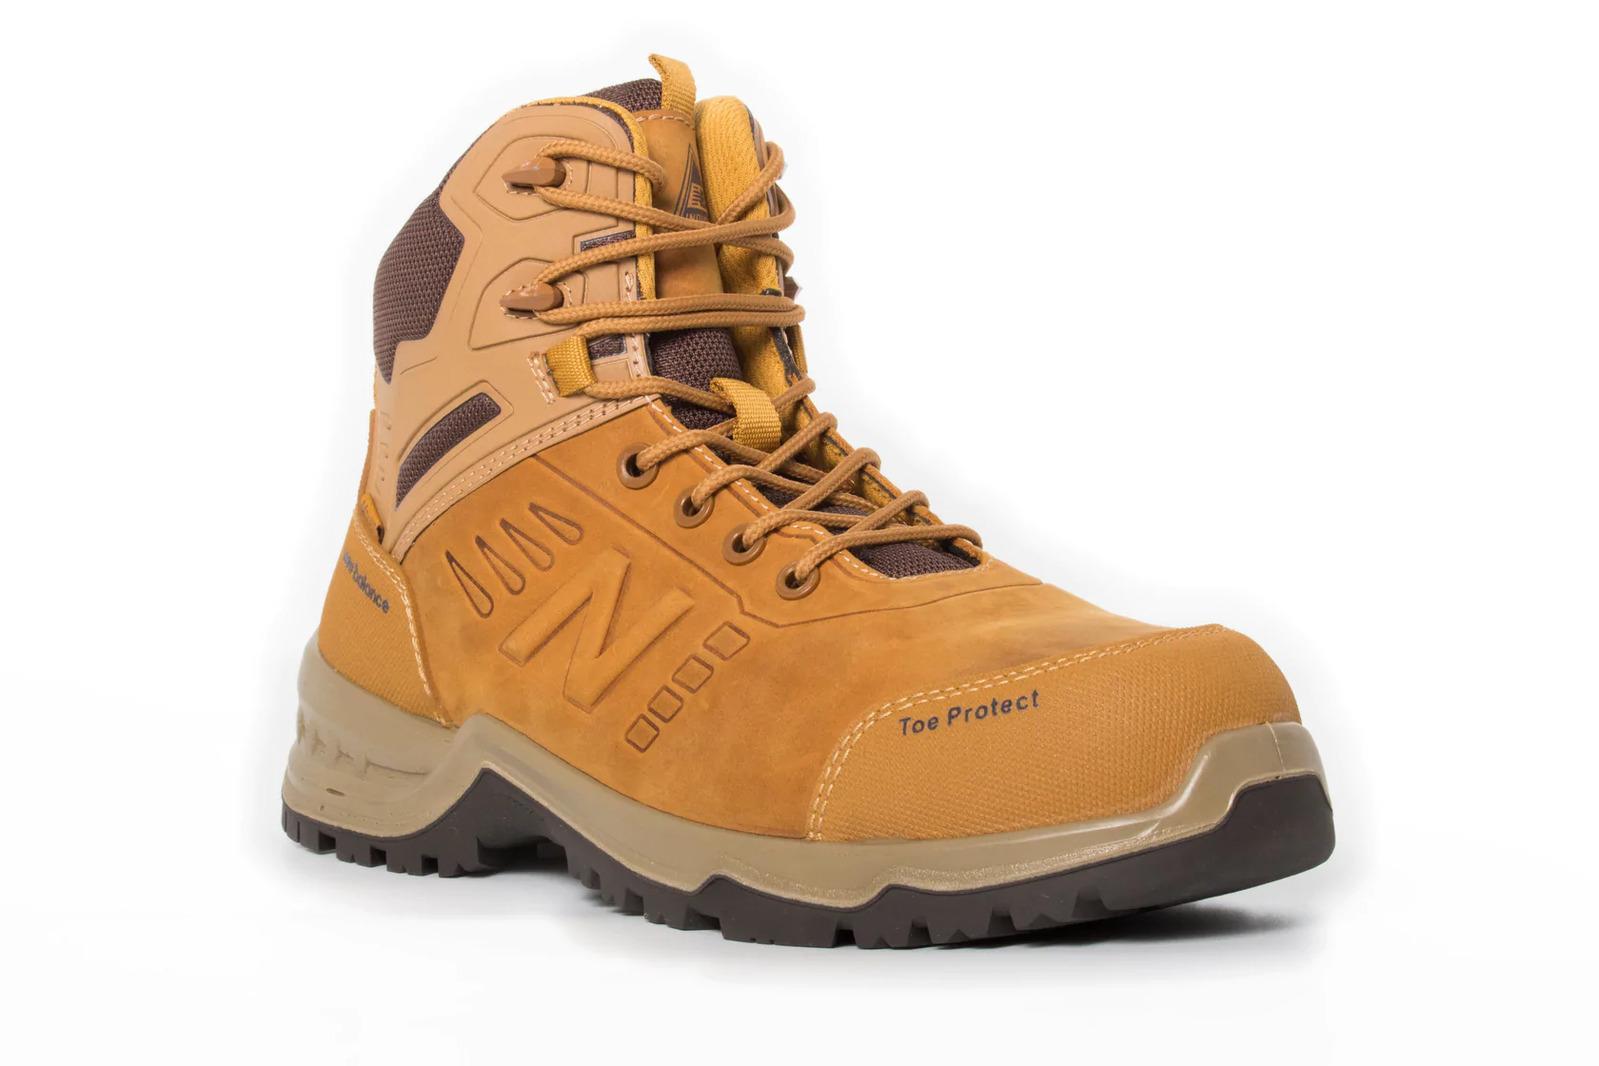 New Balance Mens Contour Steel Toe Cap Safety Work Boots with Zip - Wheat - US 8.5 Width:2E